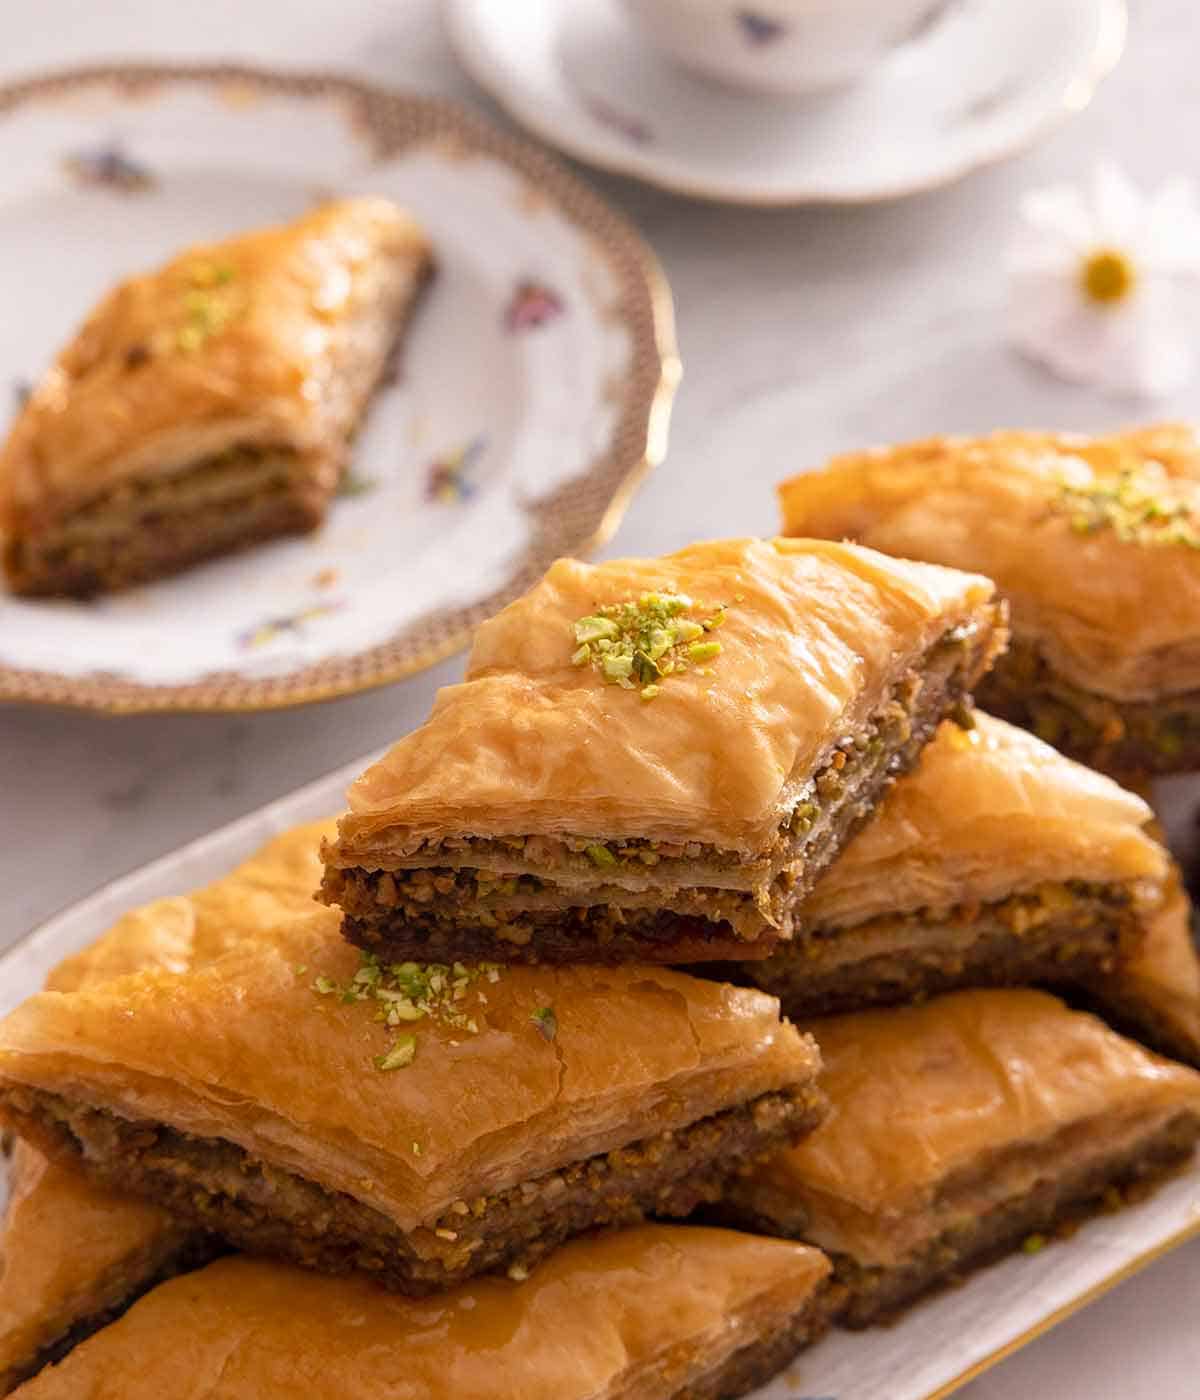 A platter of baklava stacked in three layers with a plate with one baklava in the back.